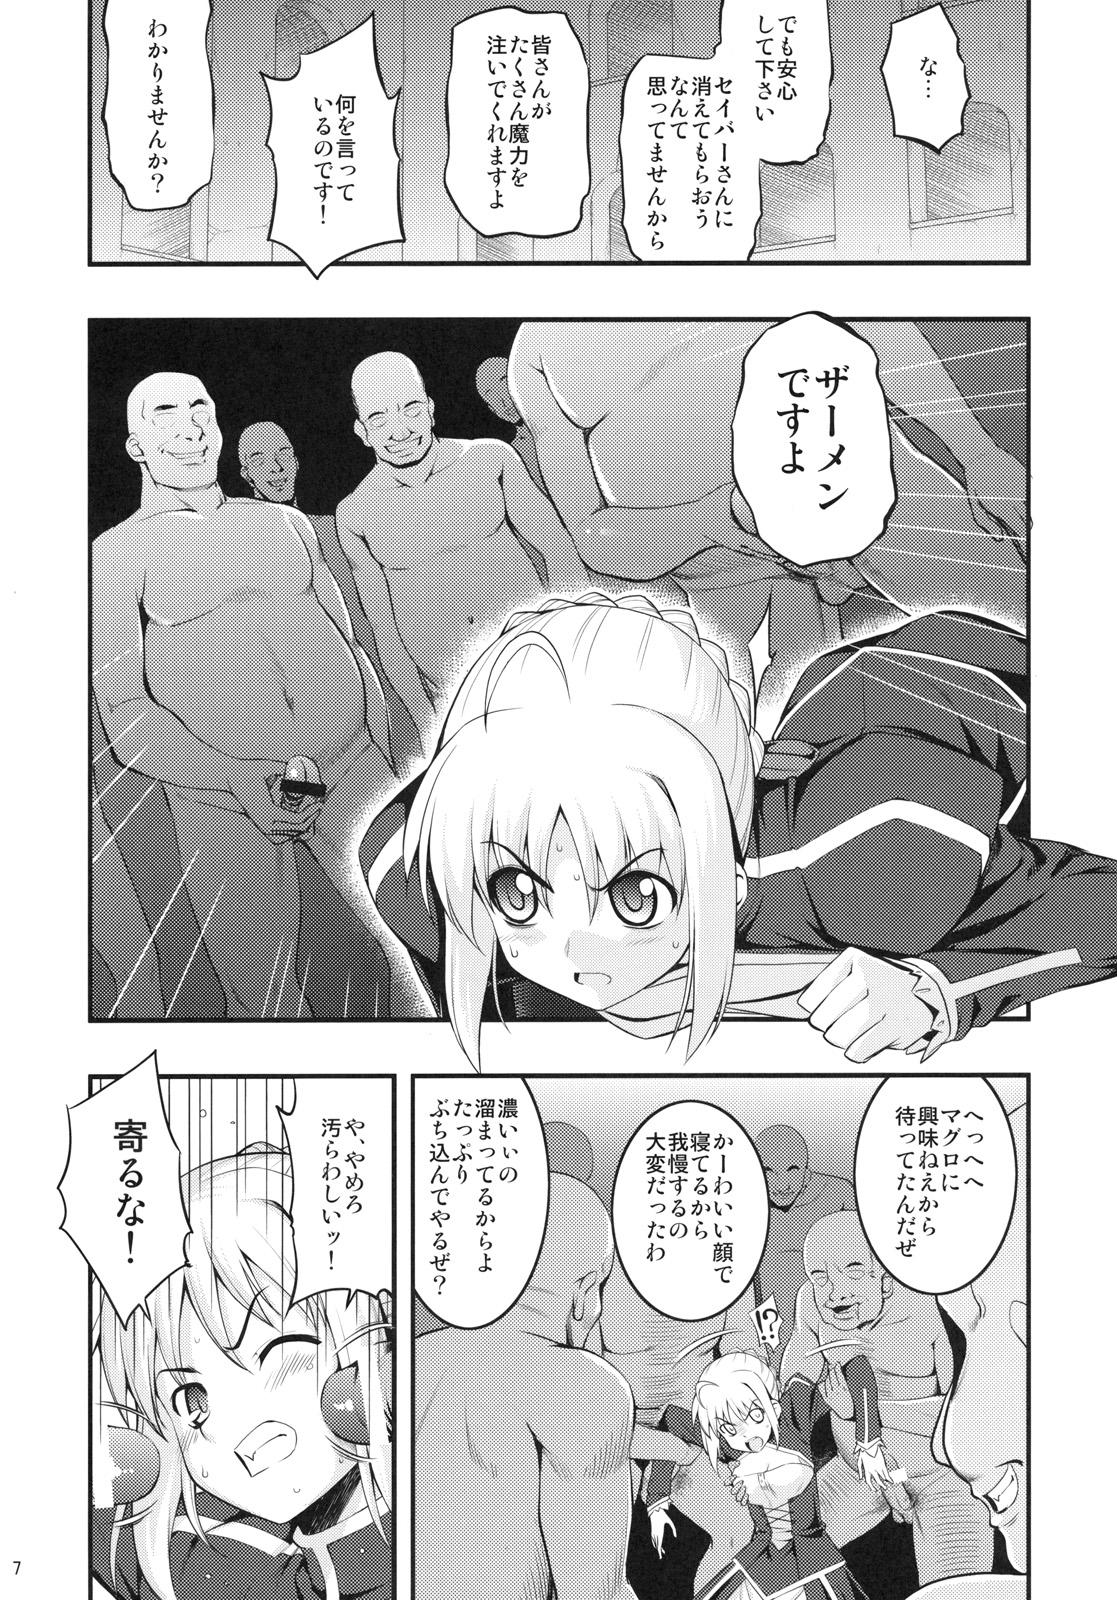  RE12 - Fate stay night Pussy Fuck - Page 6